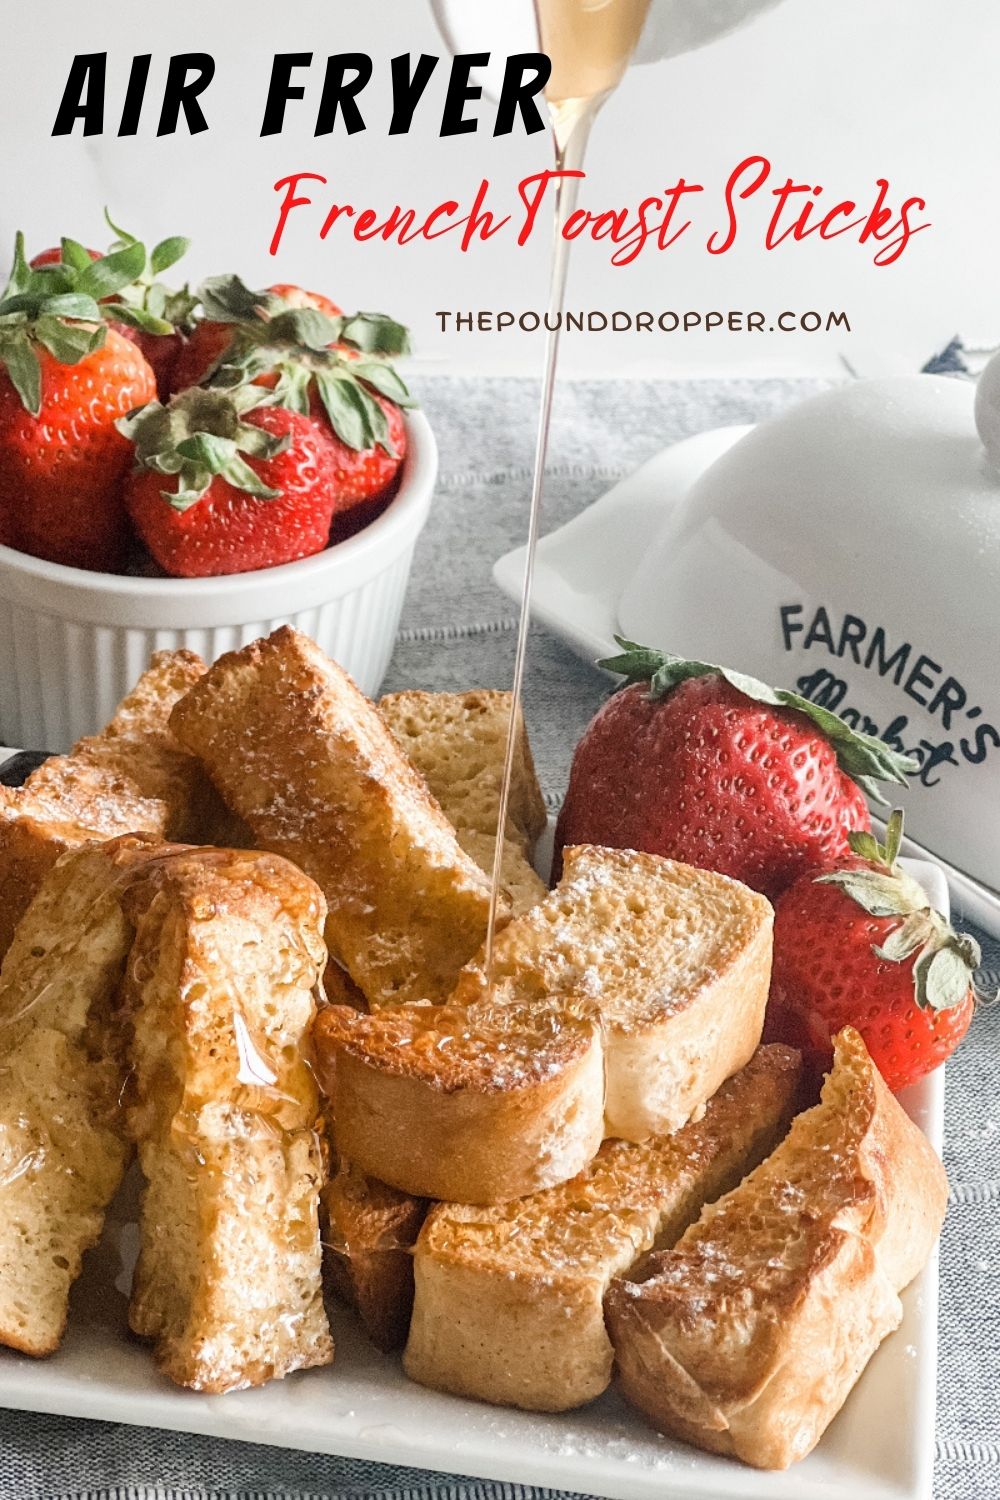 These Easy Air Fryer French Toast Sticks are soft on the inside and crispy outside. These French Toast Sticks are easy to make and prefect for those busy weekday mornings!  A family friendly, freezer-friendly, meal prepping recipe! via @pounddropper